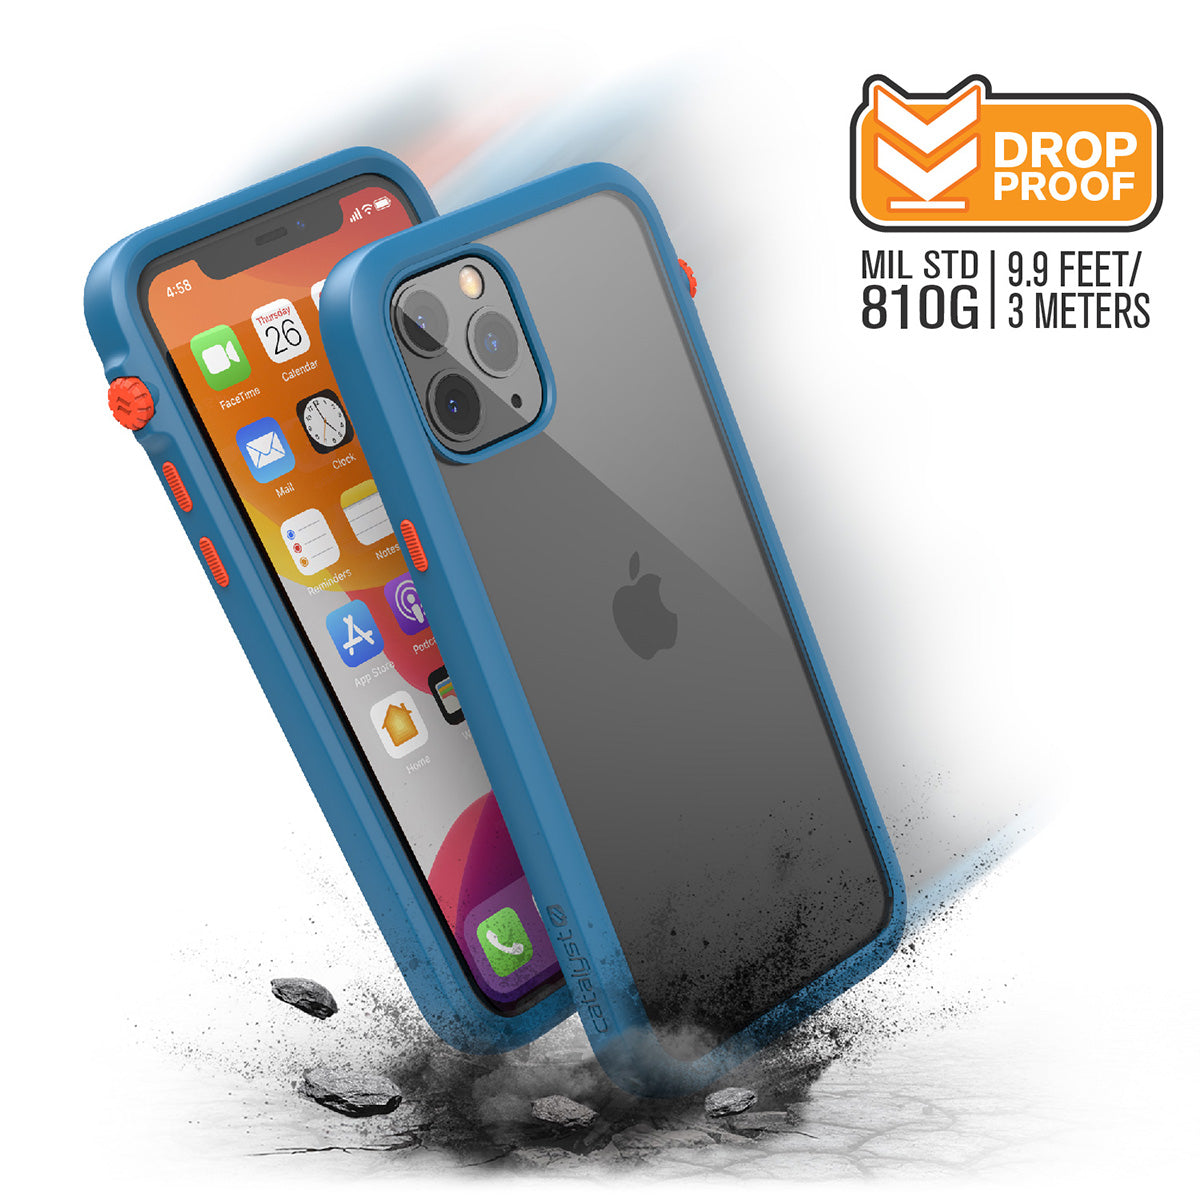 catalyst iPhone 11 series impact protection case blueridge sunset showing side views and buttons of the case with cracked floor for iPhone 11 pro text reads drop proof mil std 9.9 feet 810g 3 meters 